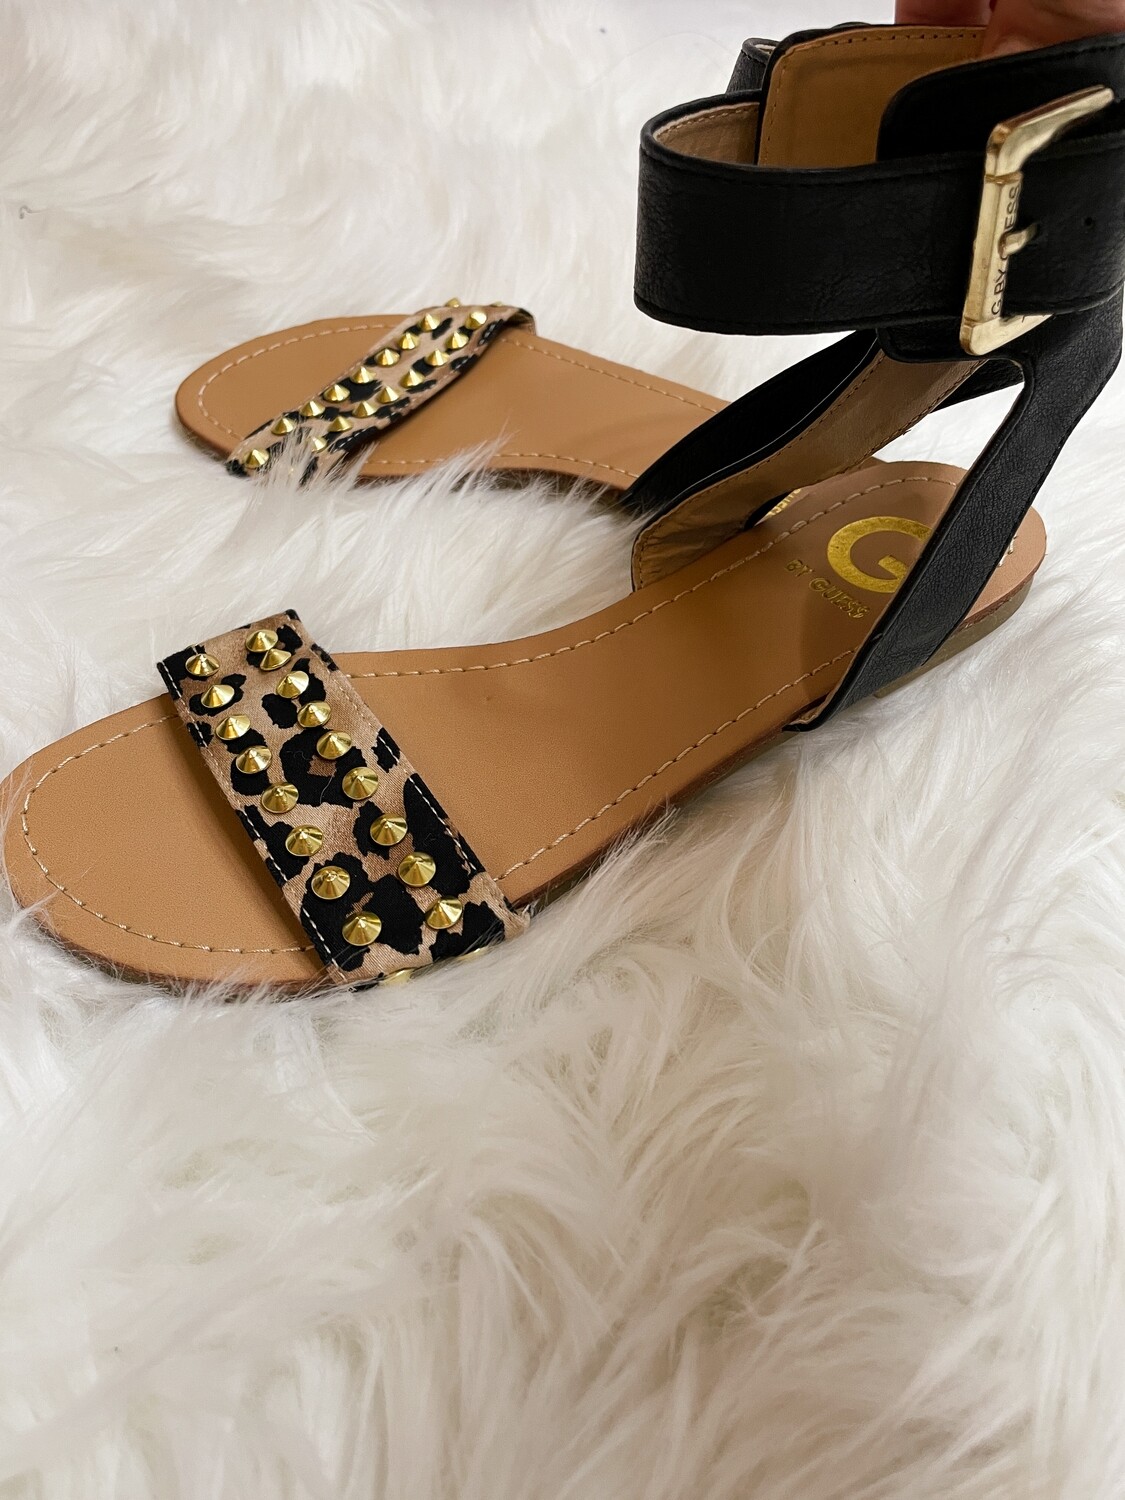 Guess Studded Animal Print Ankle Sandals - Size 5.5 